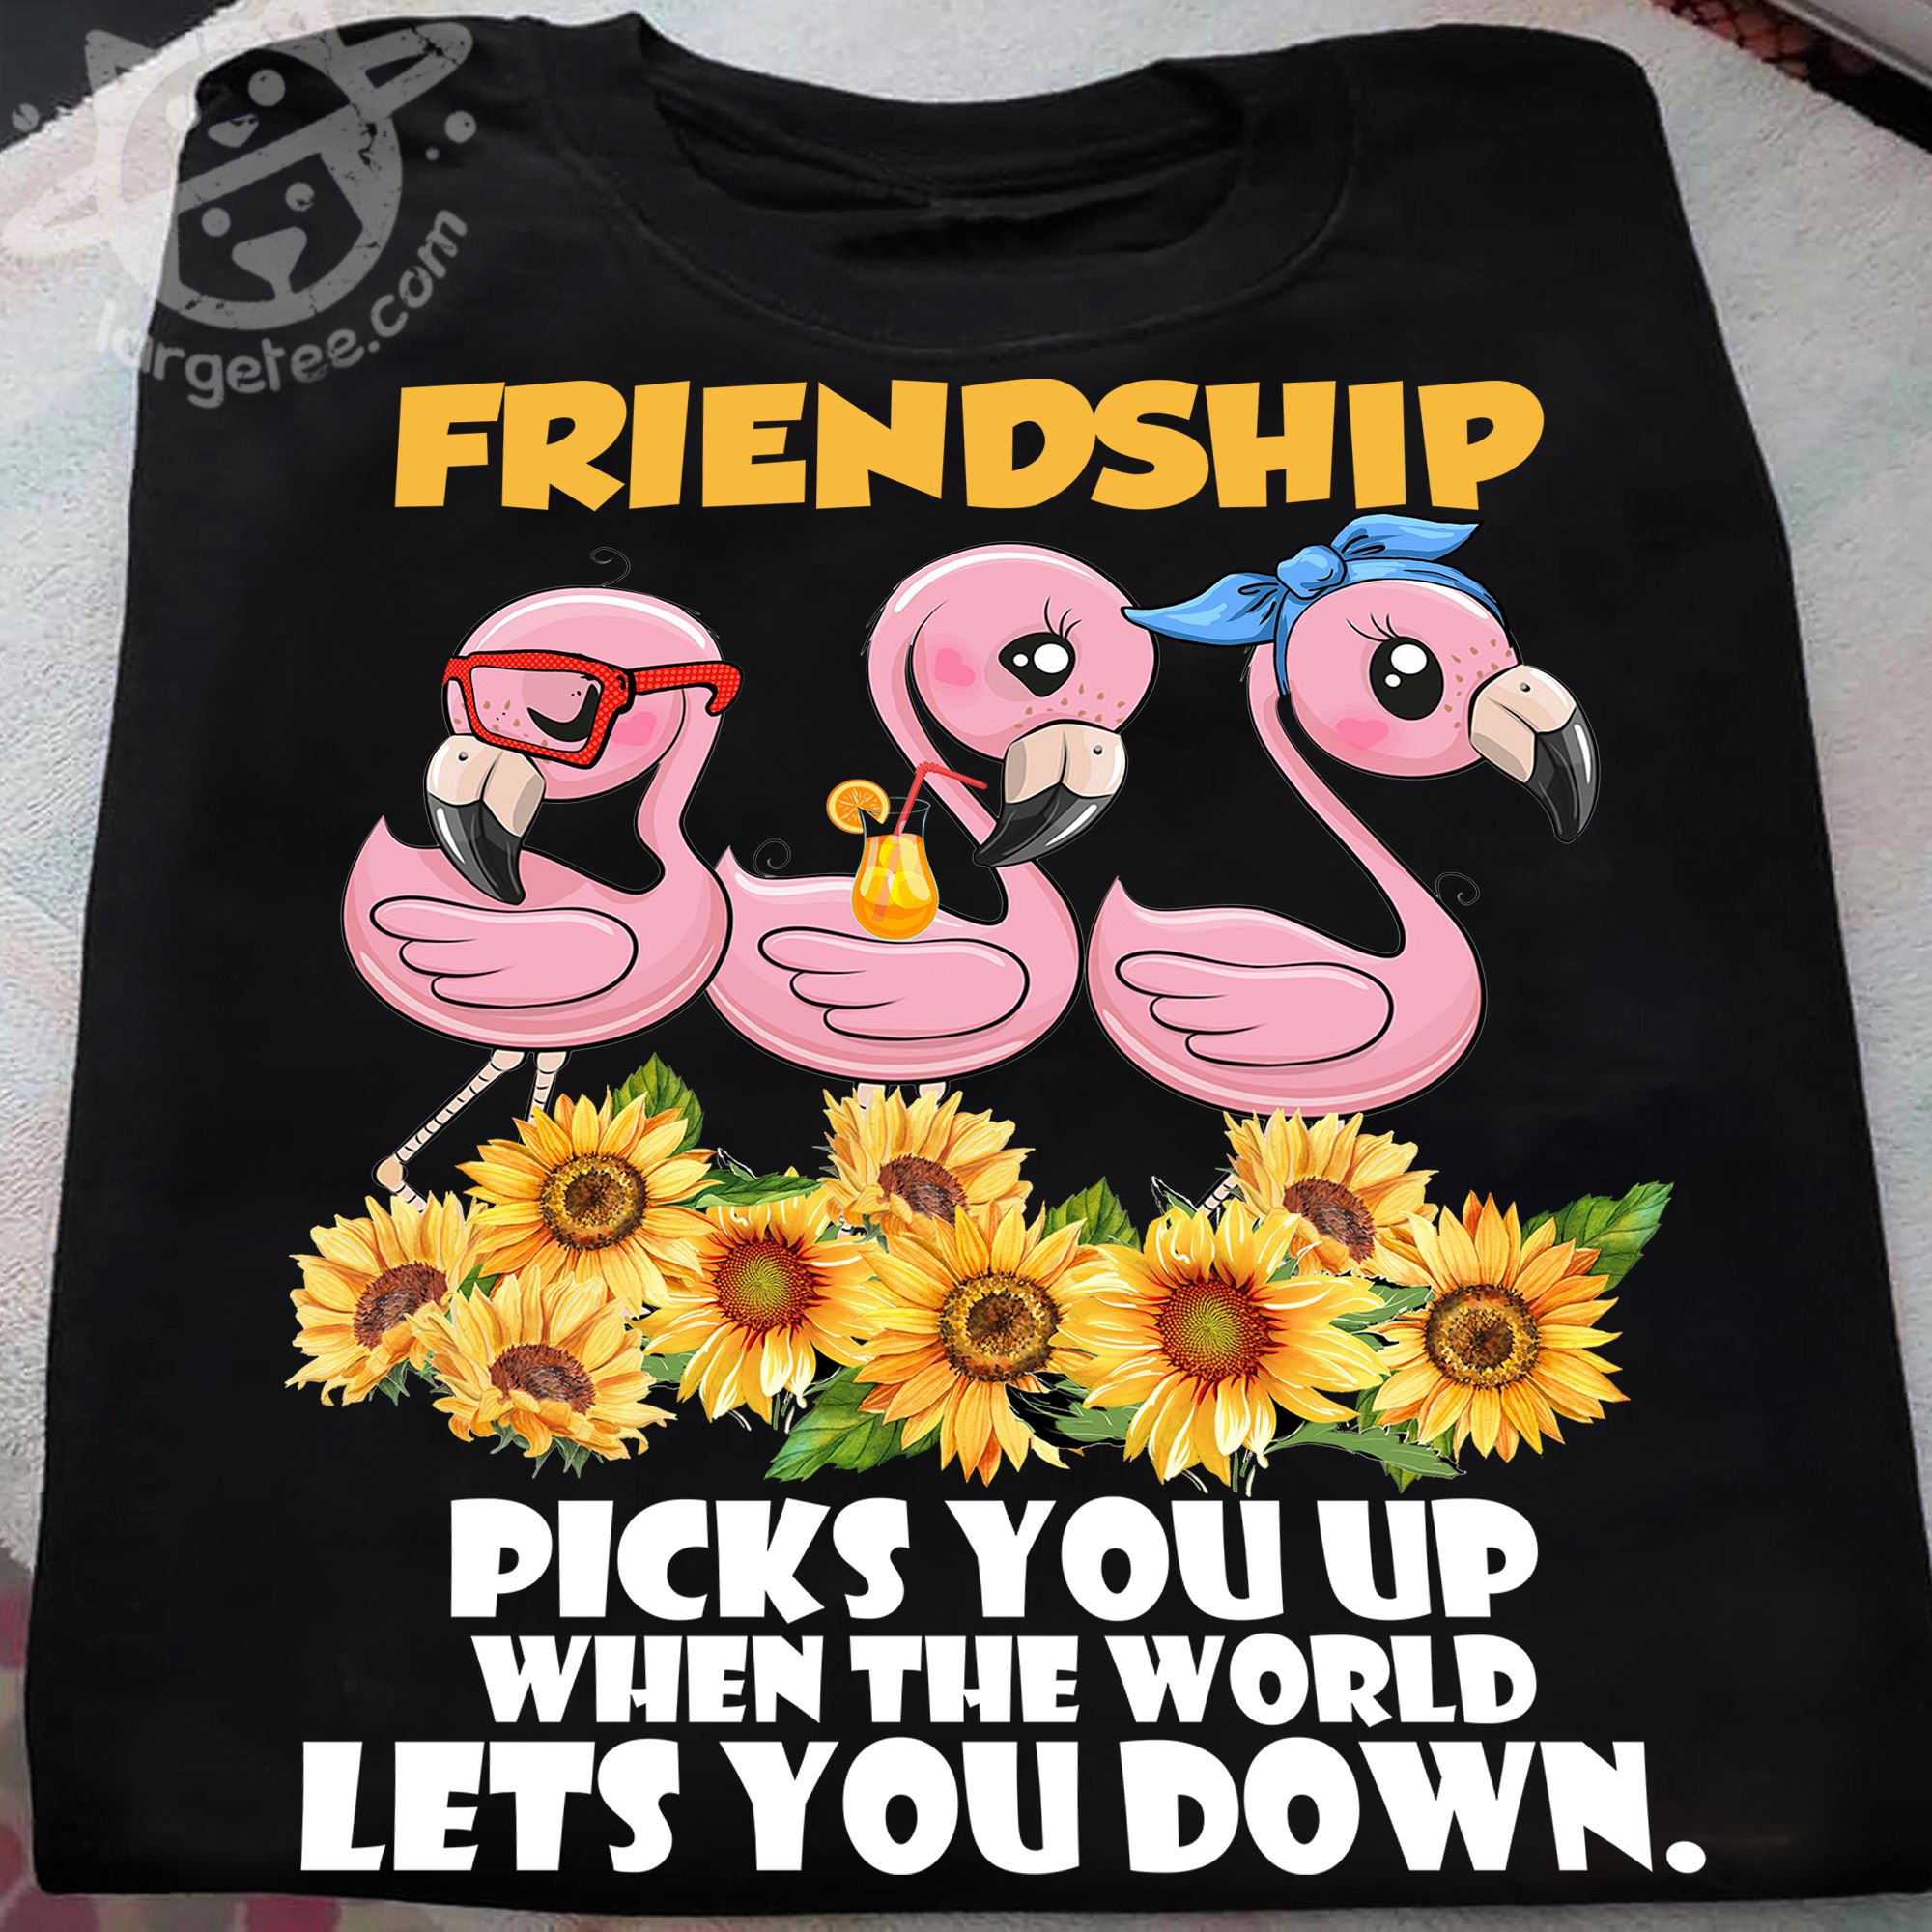 Friendship picks you up when the world lets you down - Flamingo friendship